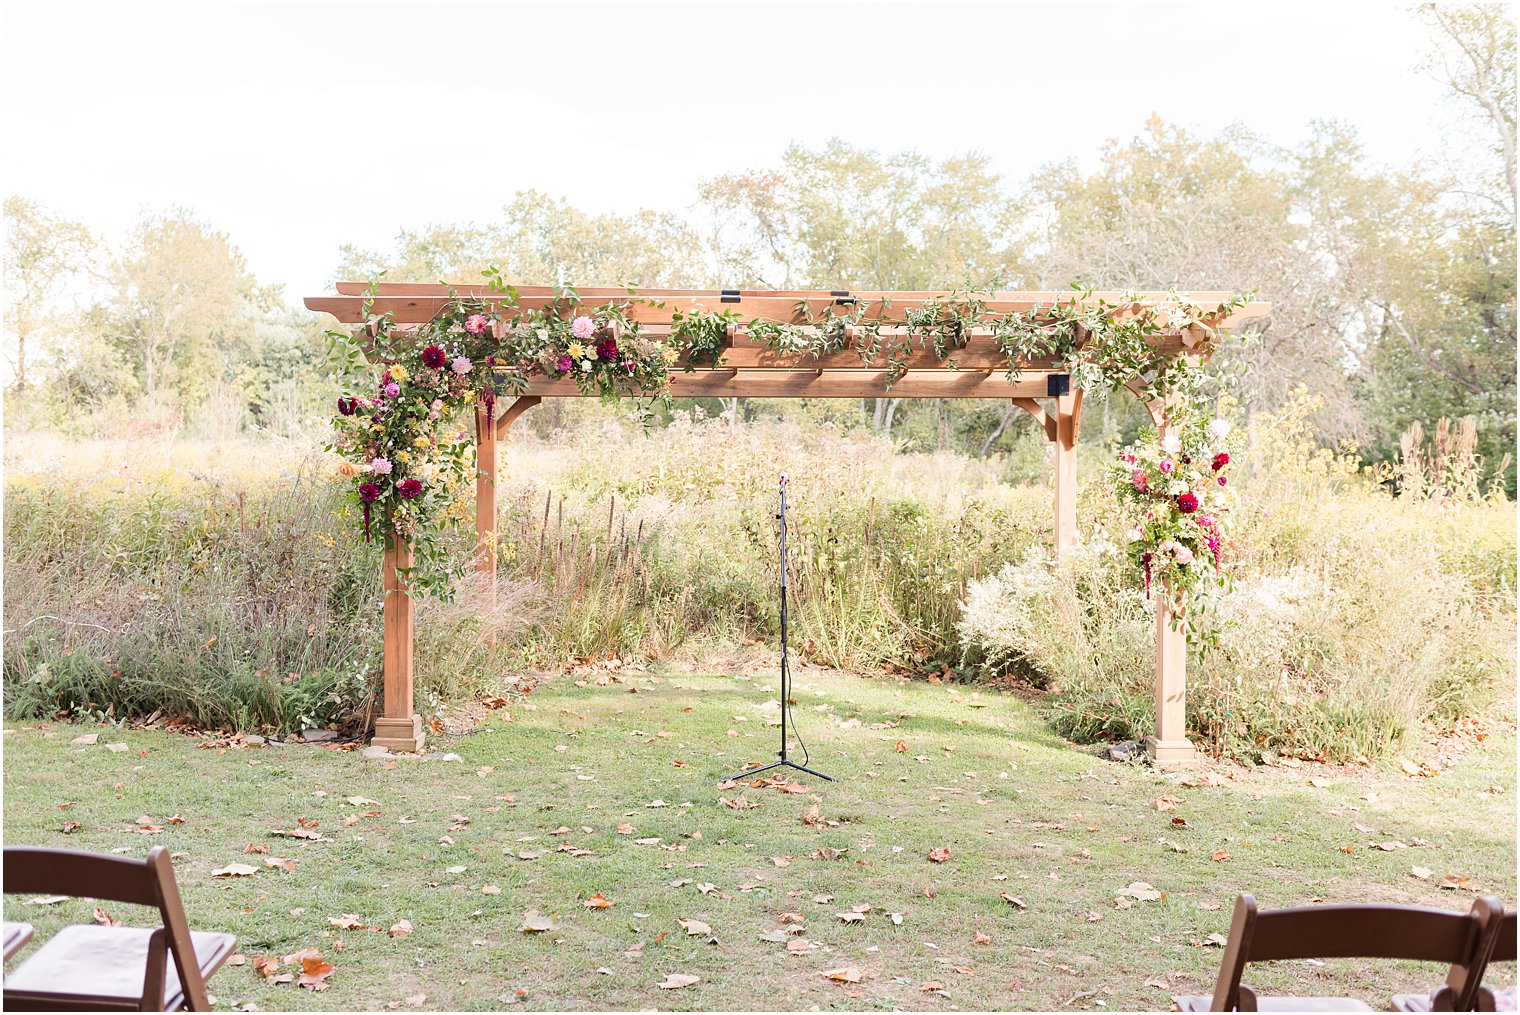 wooden arbor with wildflowers for fall wedding ceremony outdoors on lawn at Bishop Hall Farmstead